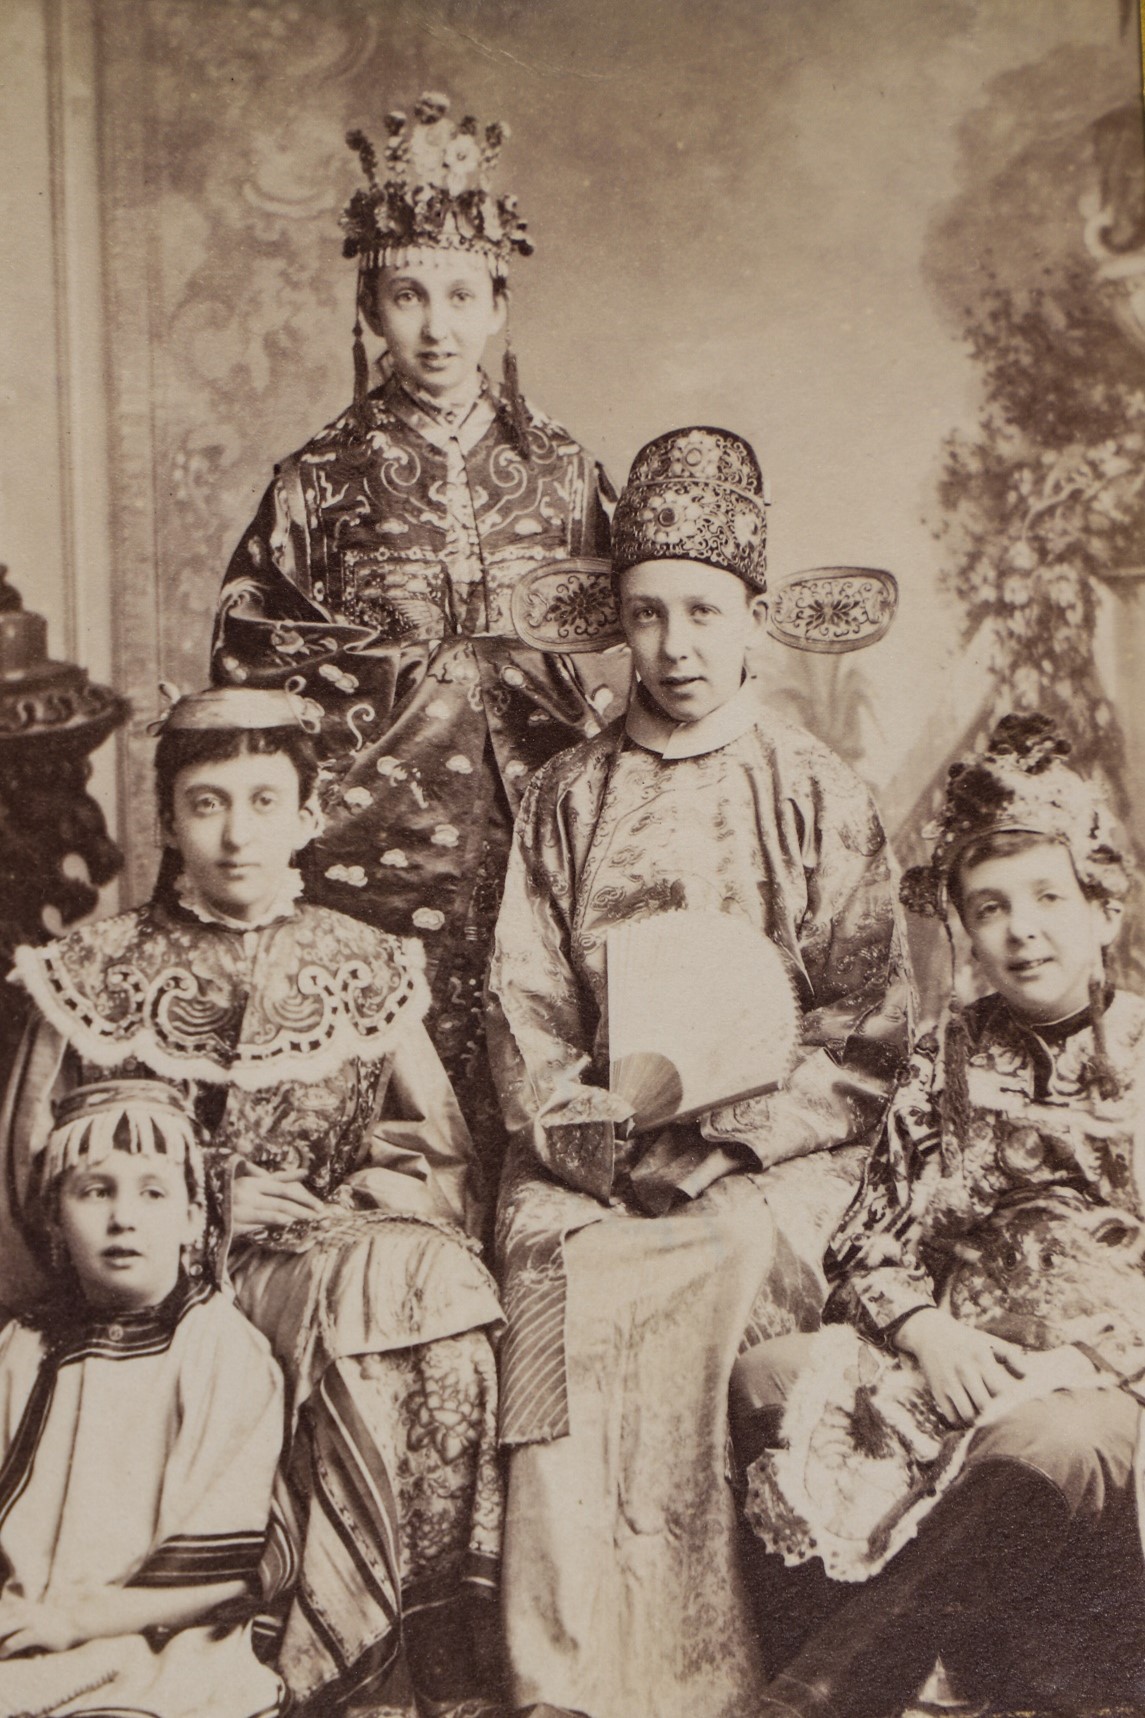 The Juvenile Fancy Dress Ball of 1886 in Southport. Photo via The Atkinson. The Marsh-Brownes, dressed as Chinese dignatories.